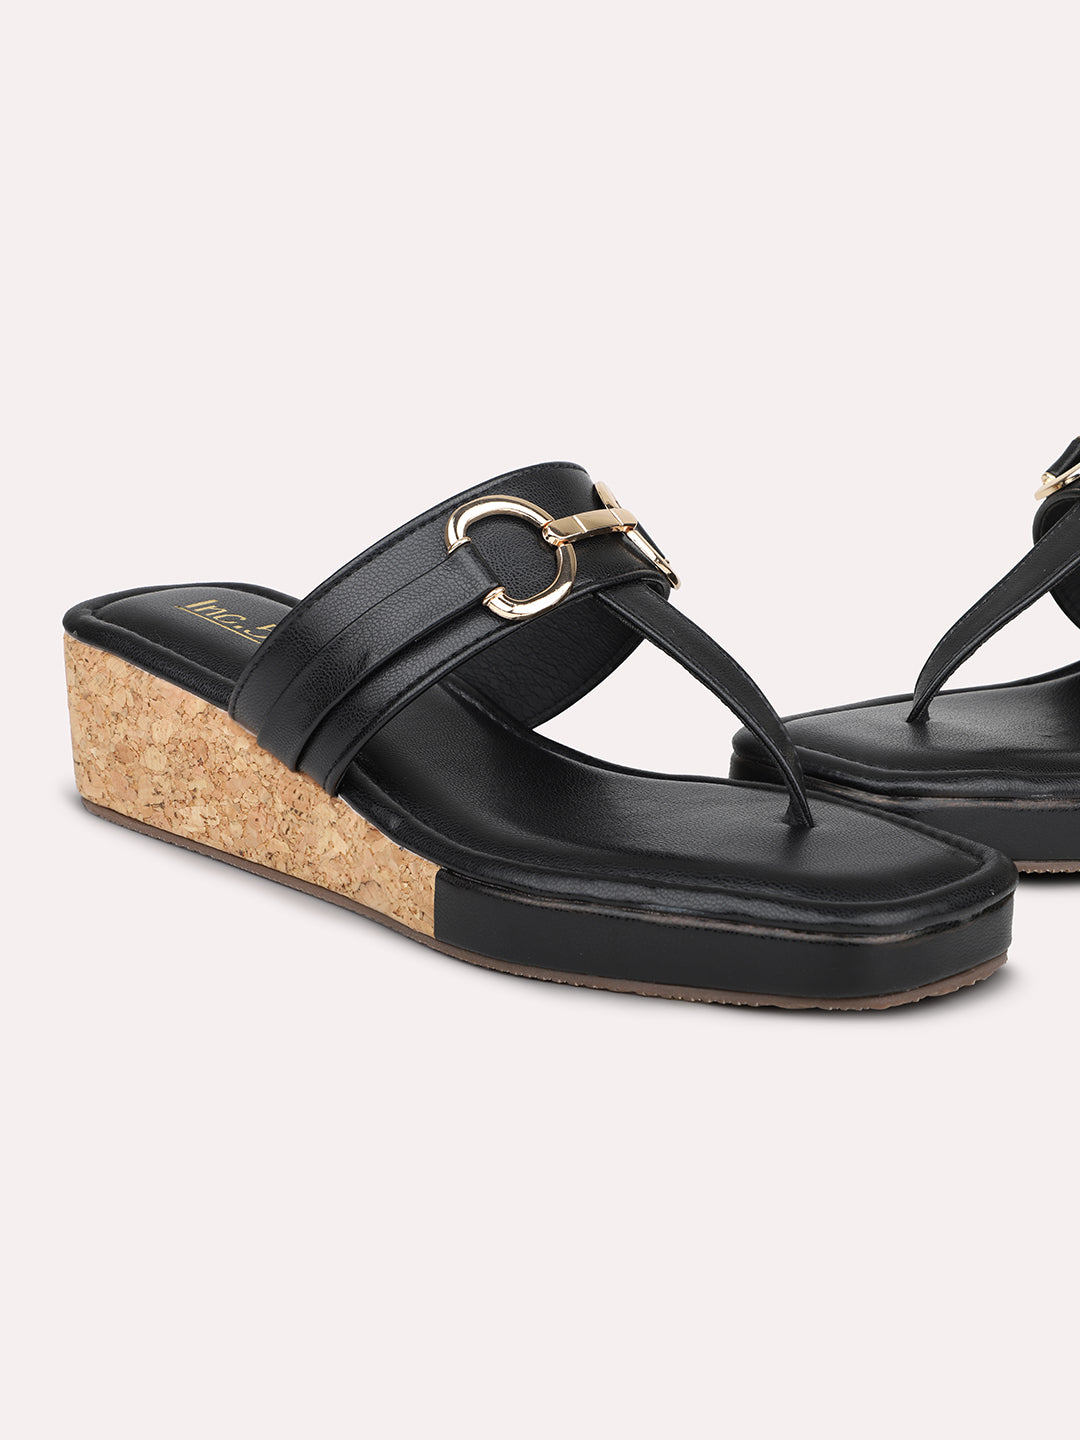 Women Black Wedges with Buckle Detail